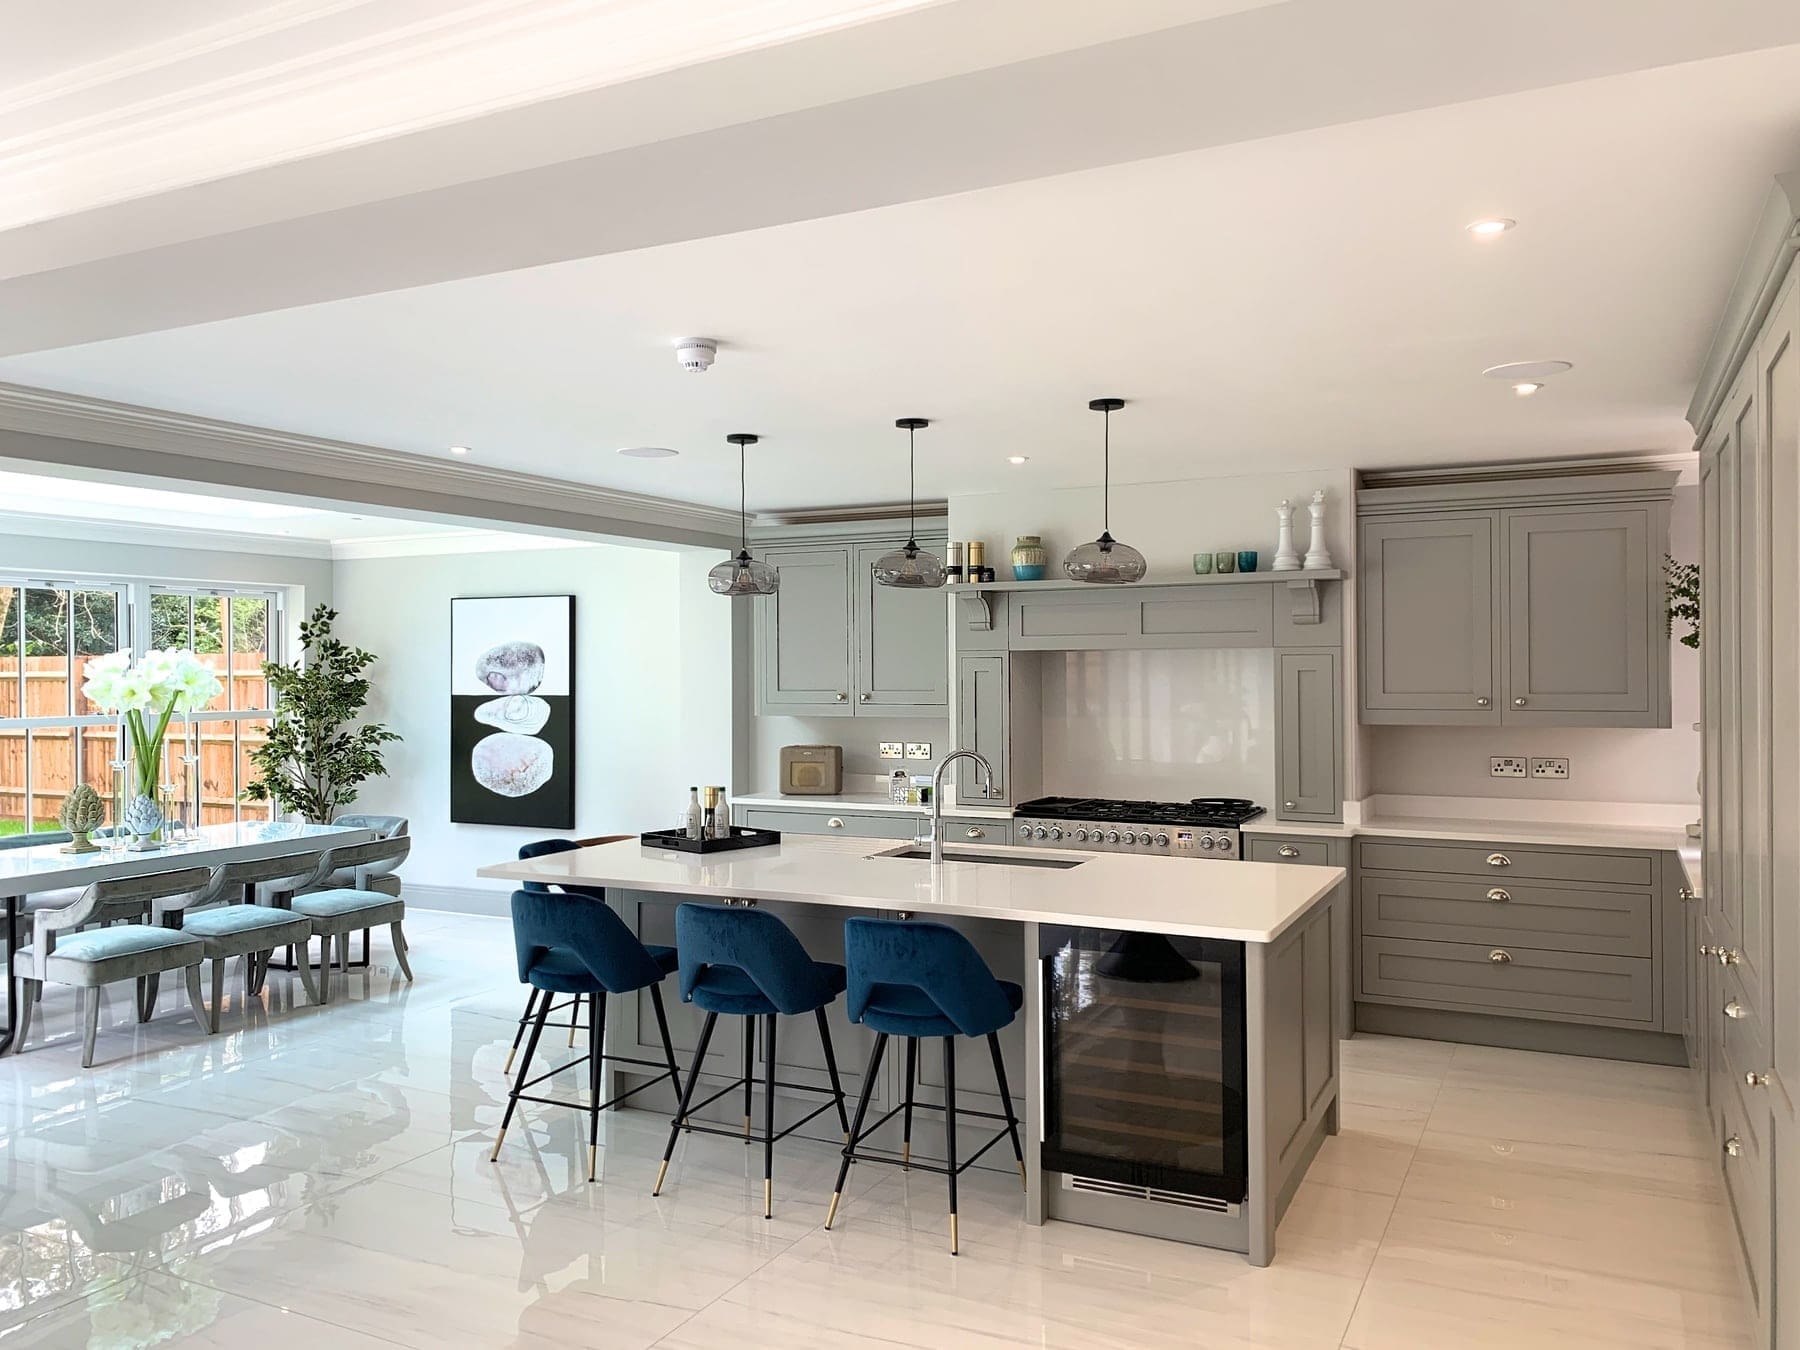 Feature Packed Contemporary Kitchen Egger Monochrome 1376 | Utopia Kitchens | Crowthorne